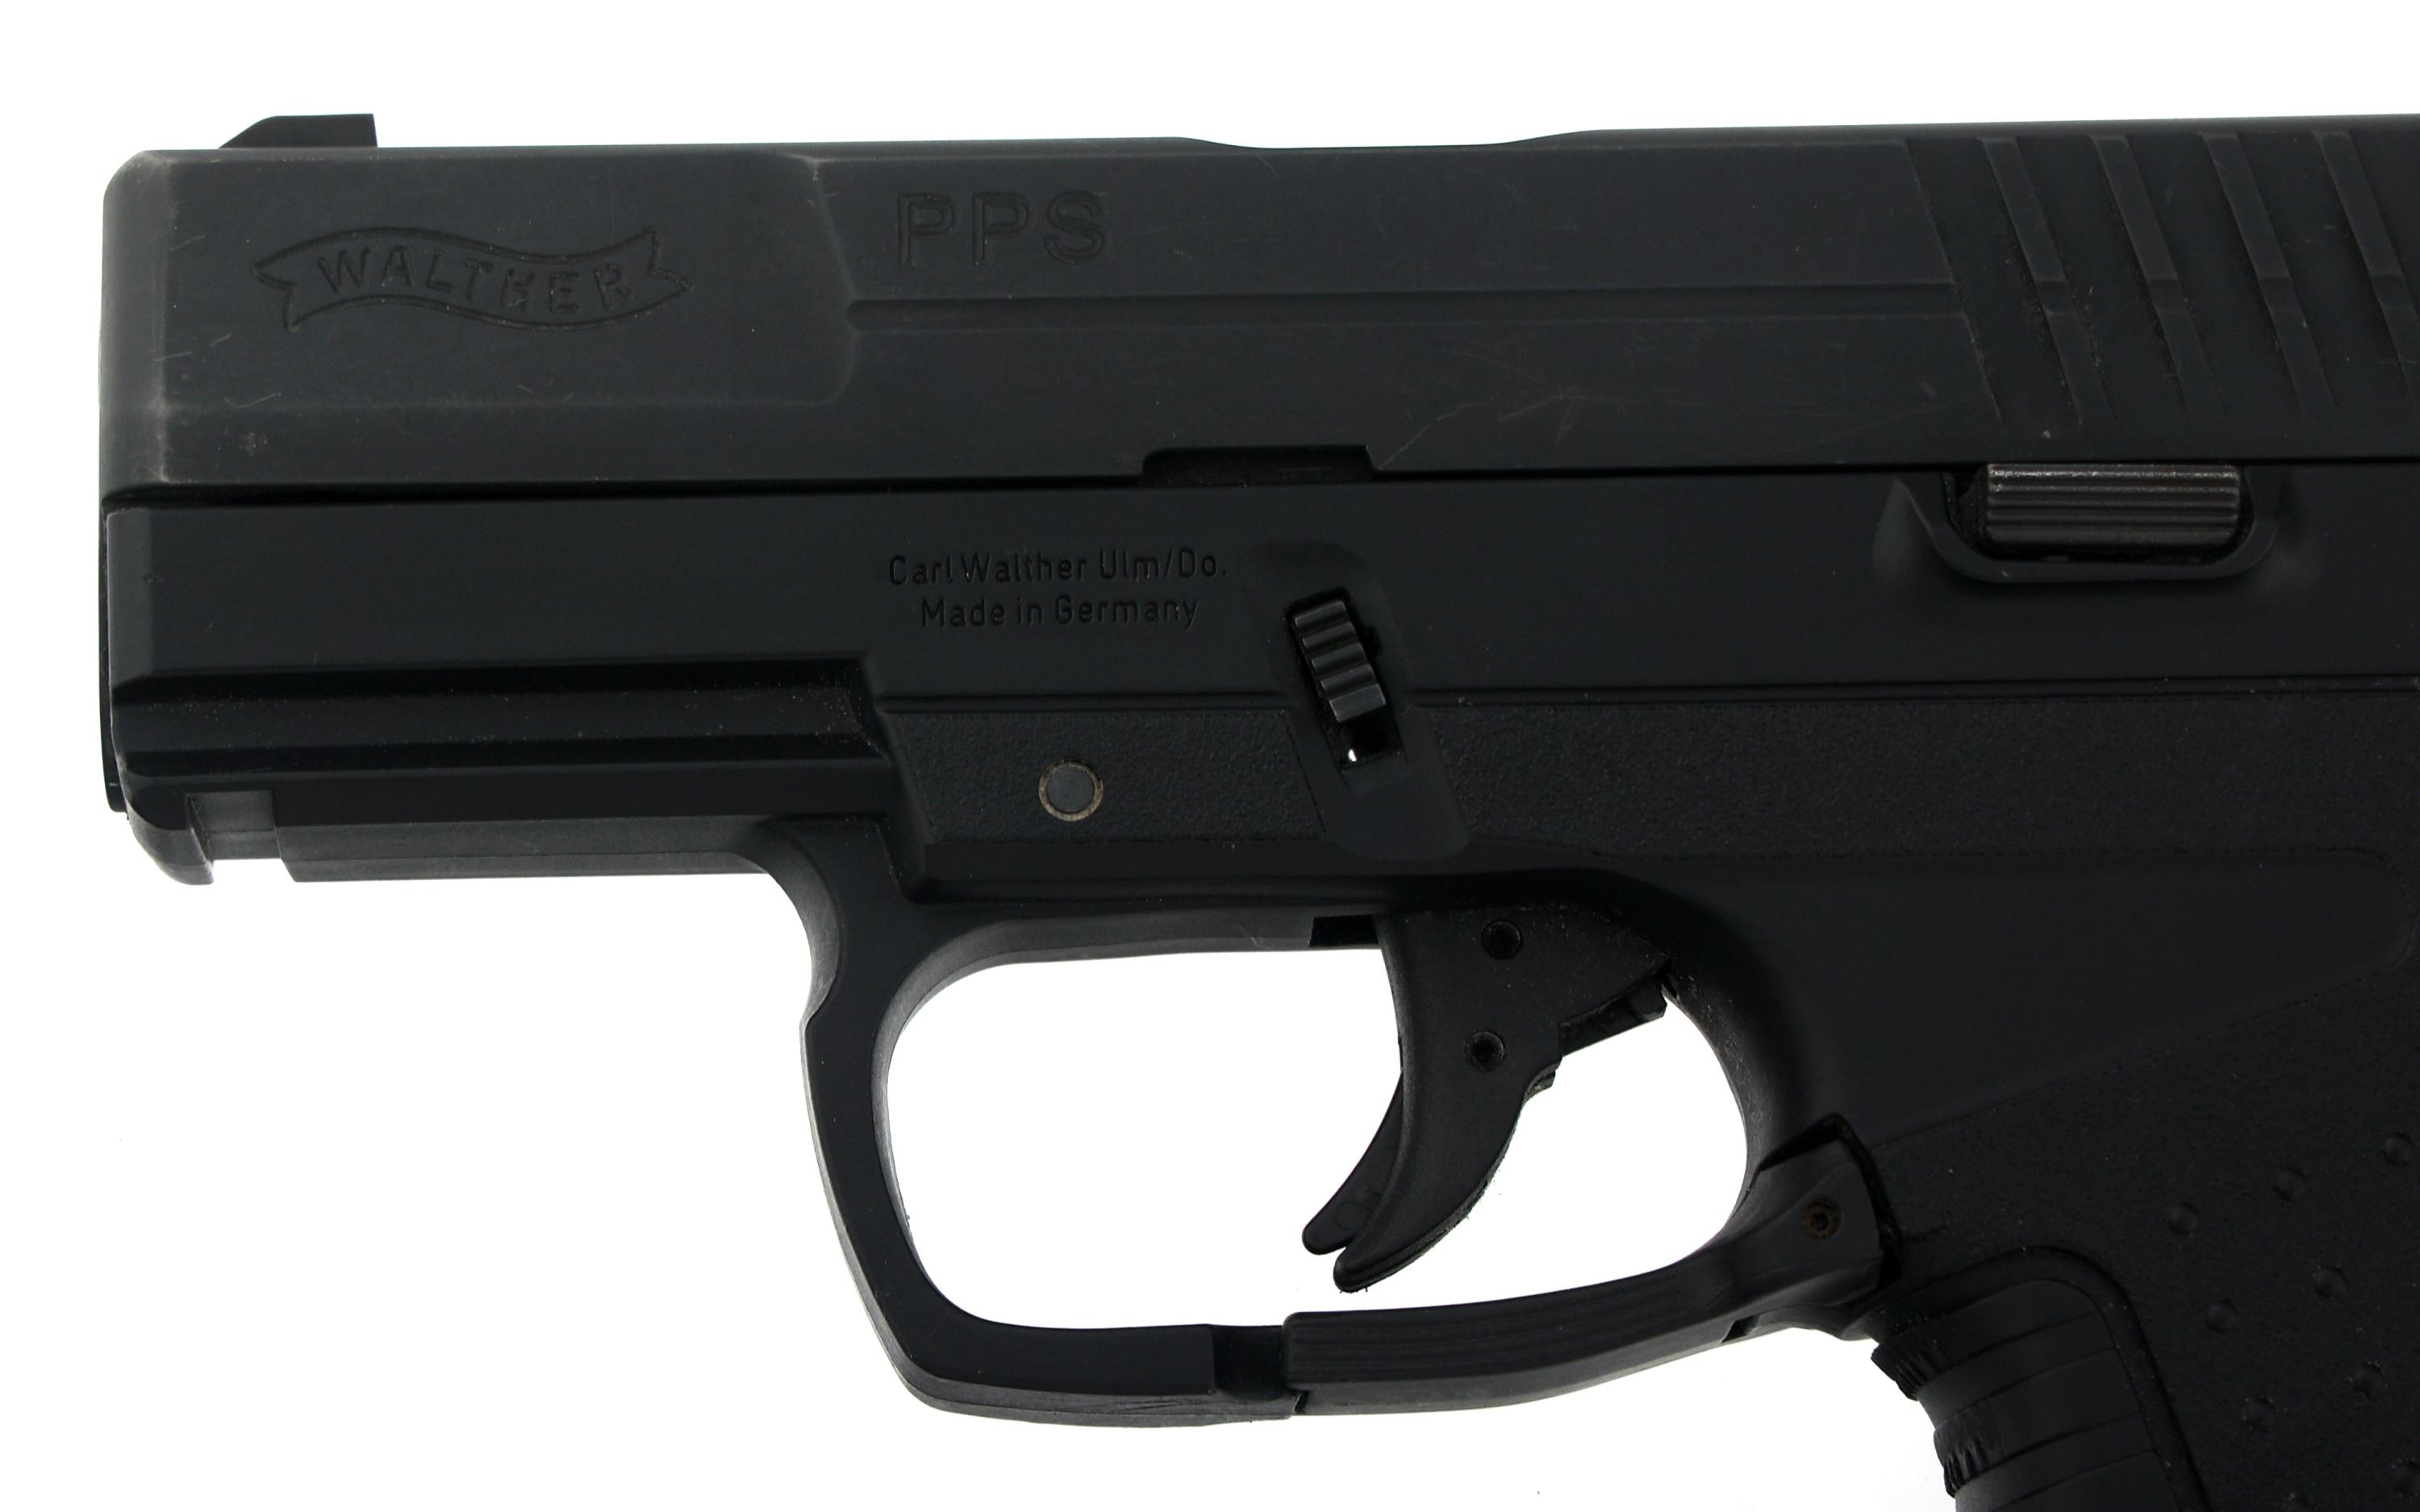 WALTHER MODEL PPS .40 S&W CALIBER PISTOL